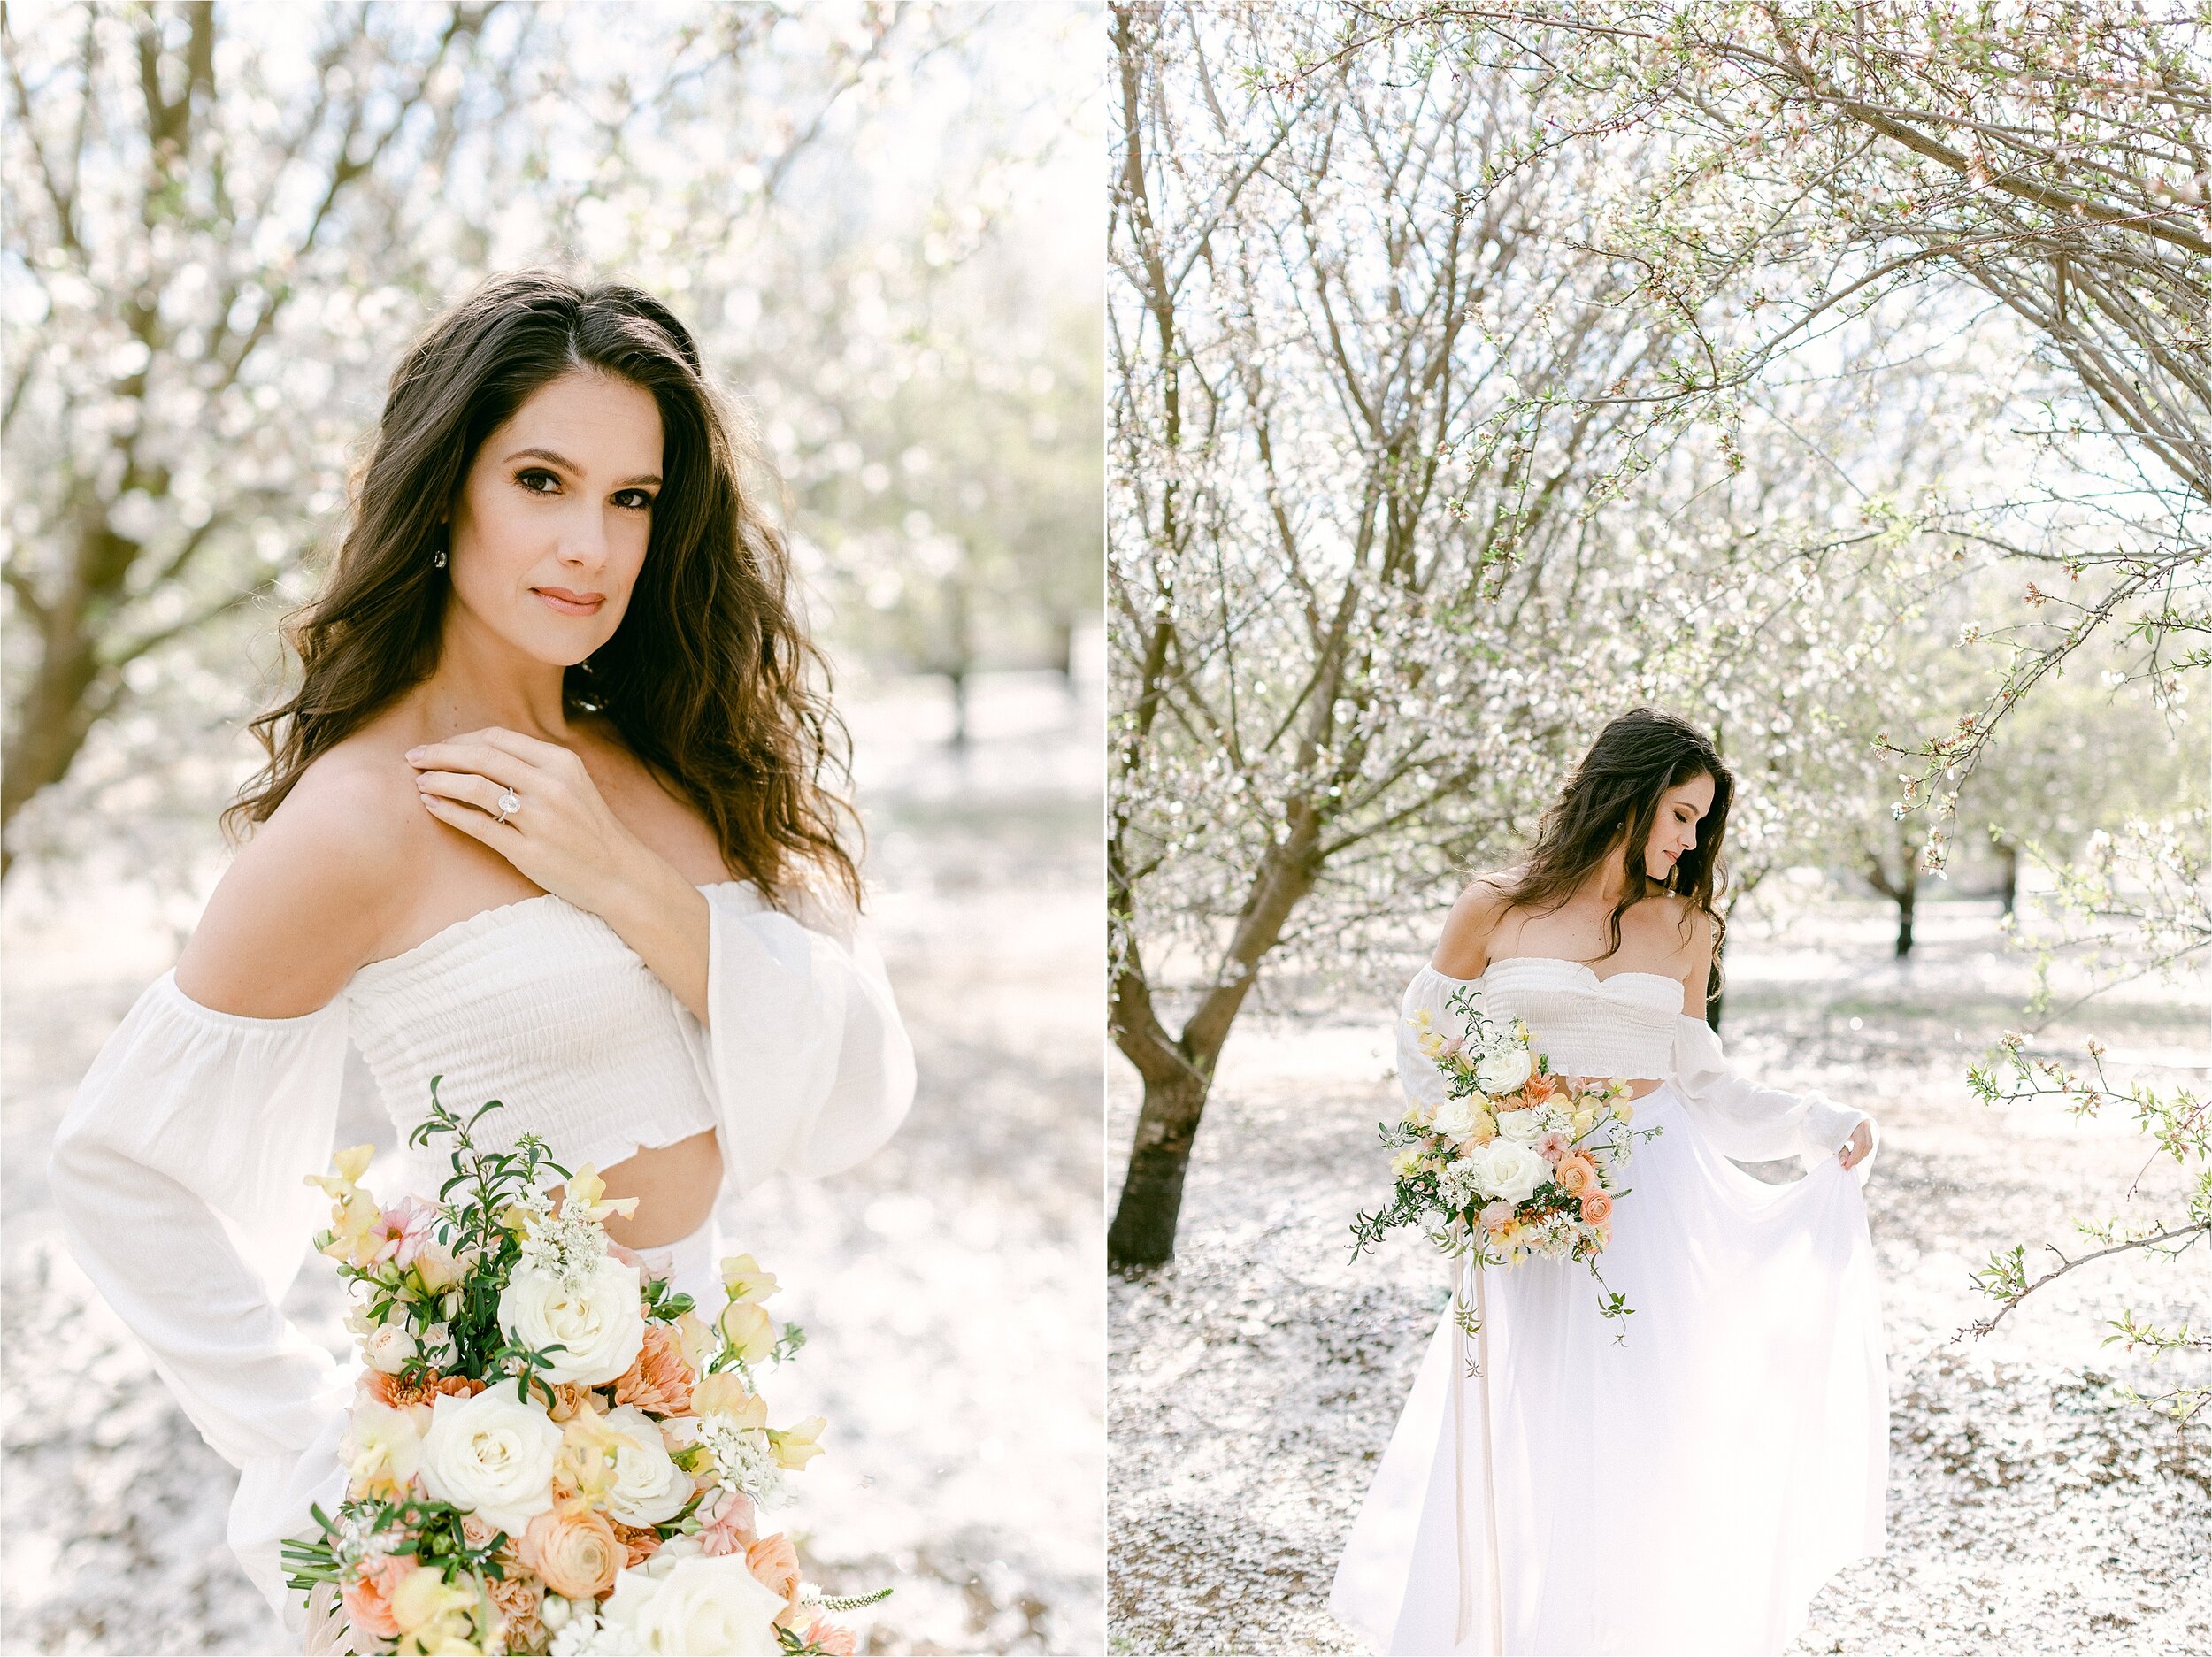 Dreamy almond grove photo location in Southern California. Bride delicately holds skirt as she walks through the almond blossoms